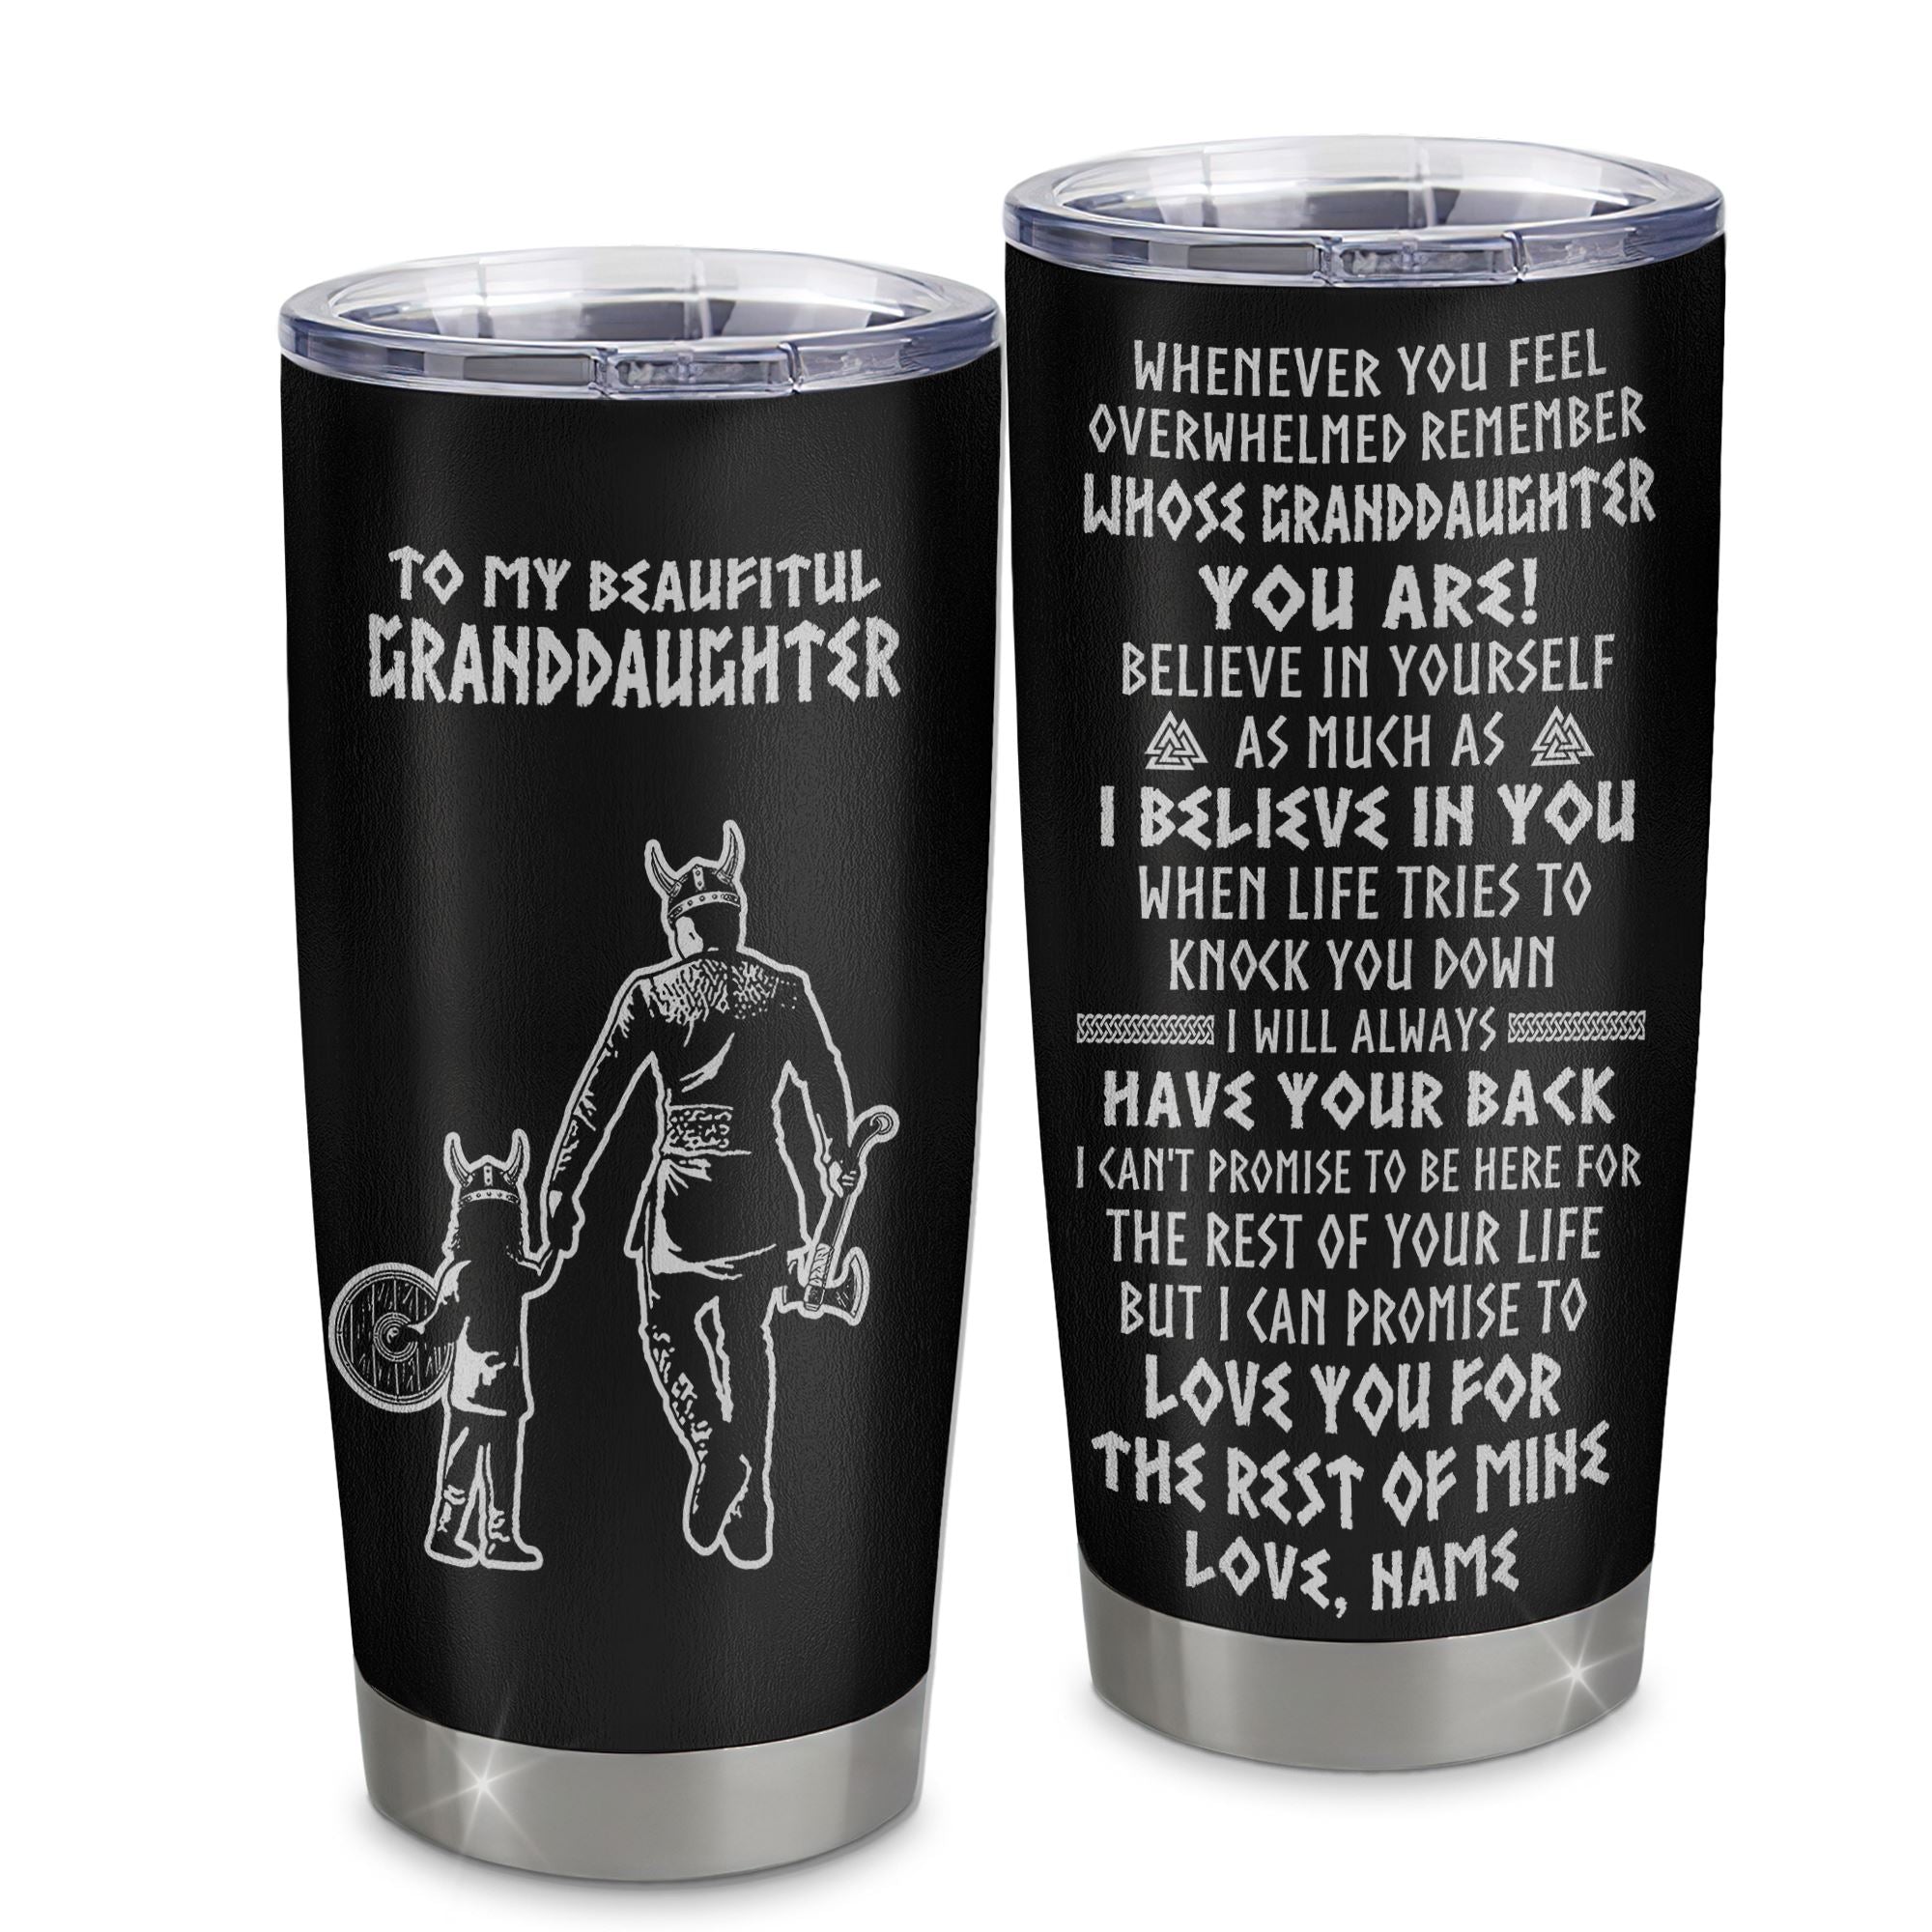 Personalized_To_My_Granddaughter_Viking_Tumbler_From_Grandpa_Stainless_Steel_Cup_Whenever_You_Feel_Overwhelmed_Birthday_Christmas_Travel_Mug_Tumbler_mockup_1.jpg